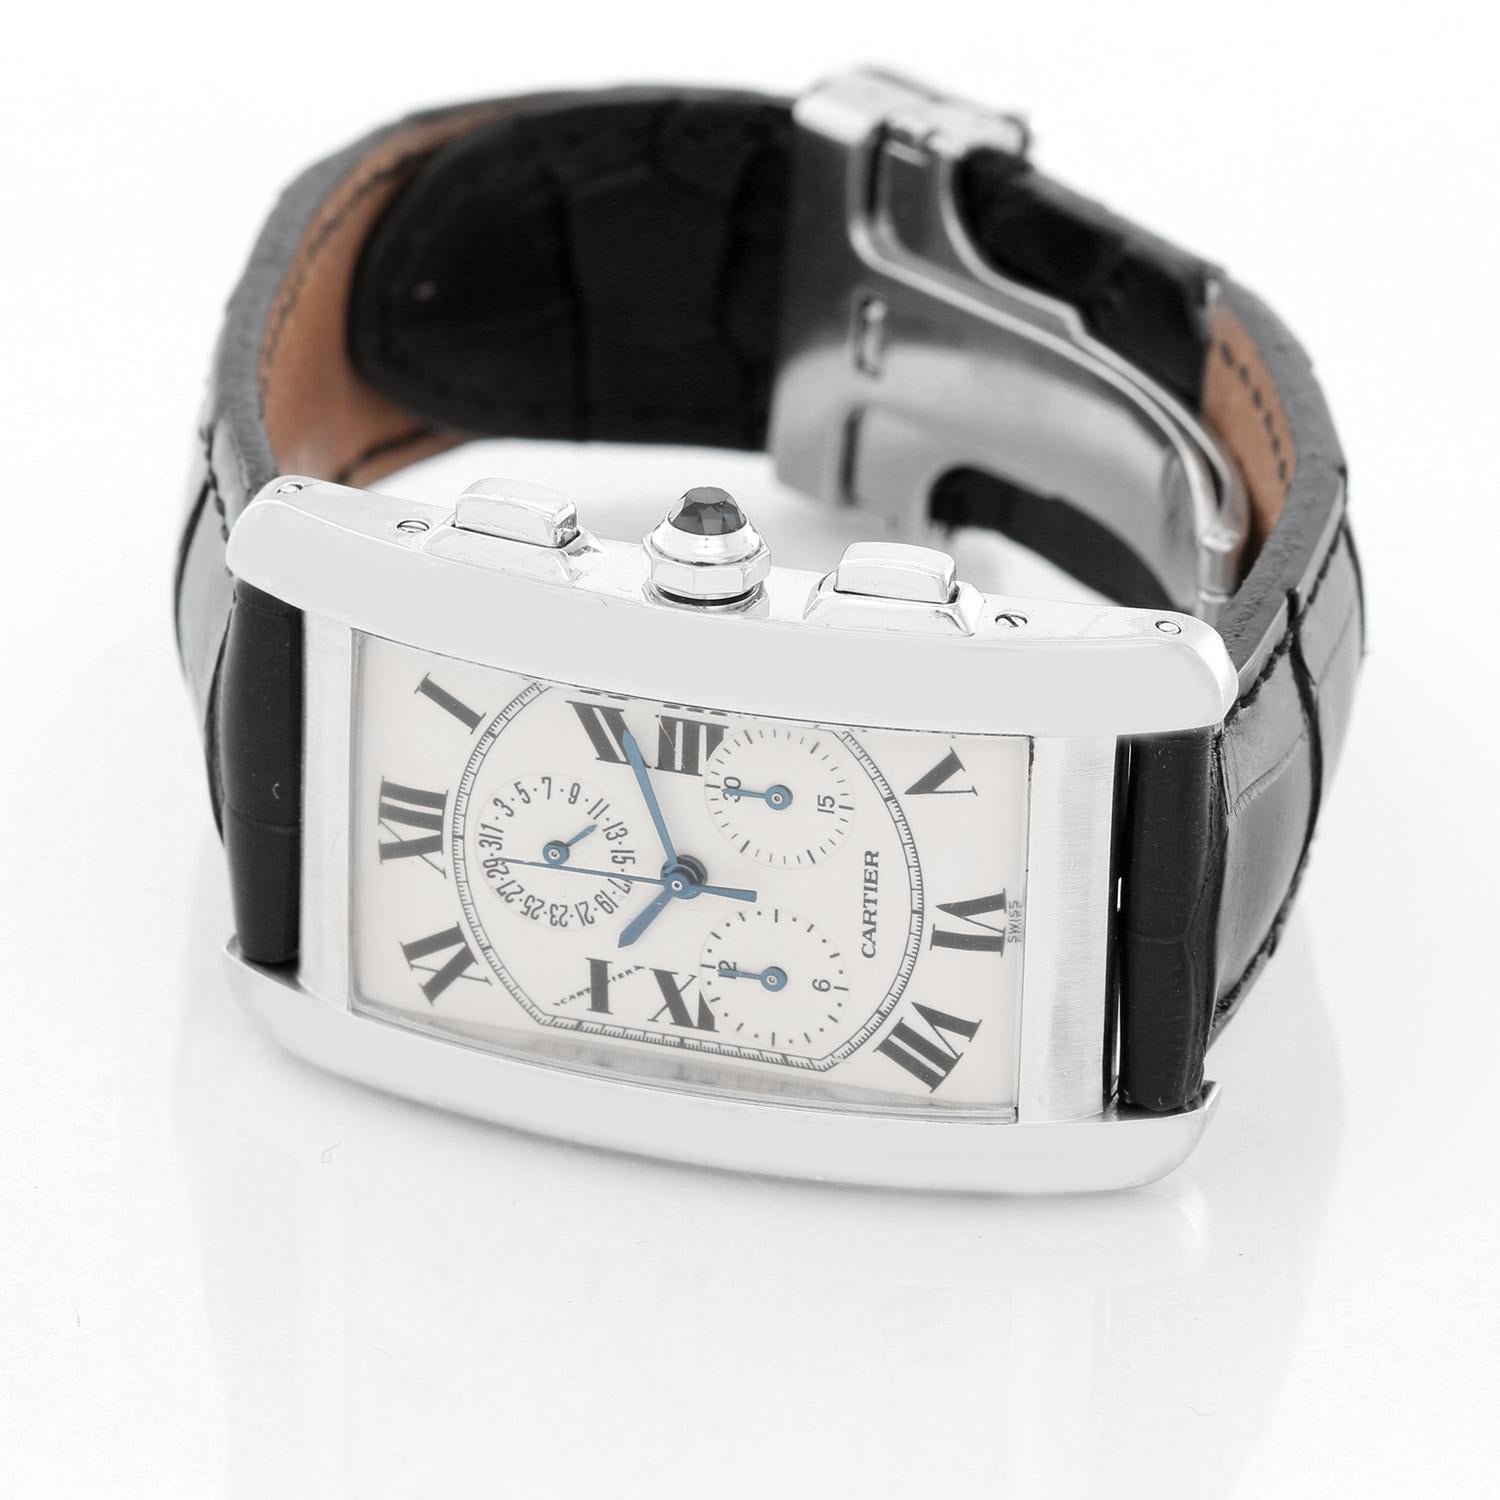 Cartier Tank Americaine (or American) Chronograph Men's Watch W2603356 -  Quartz chronograph with date. 18k white gold rectangular style case (26mm x 45mm). Ivory colored dial with black Roman numerals; date; hour minutes and seconds recorders.